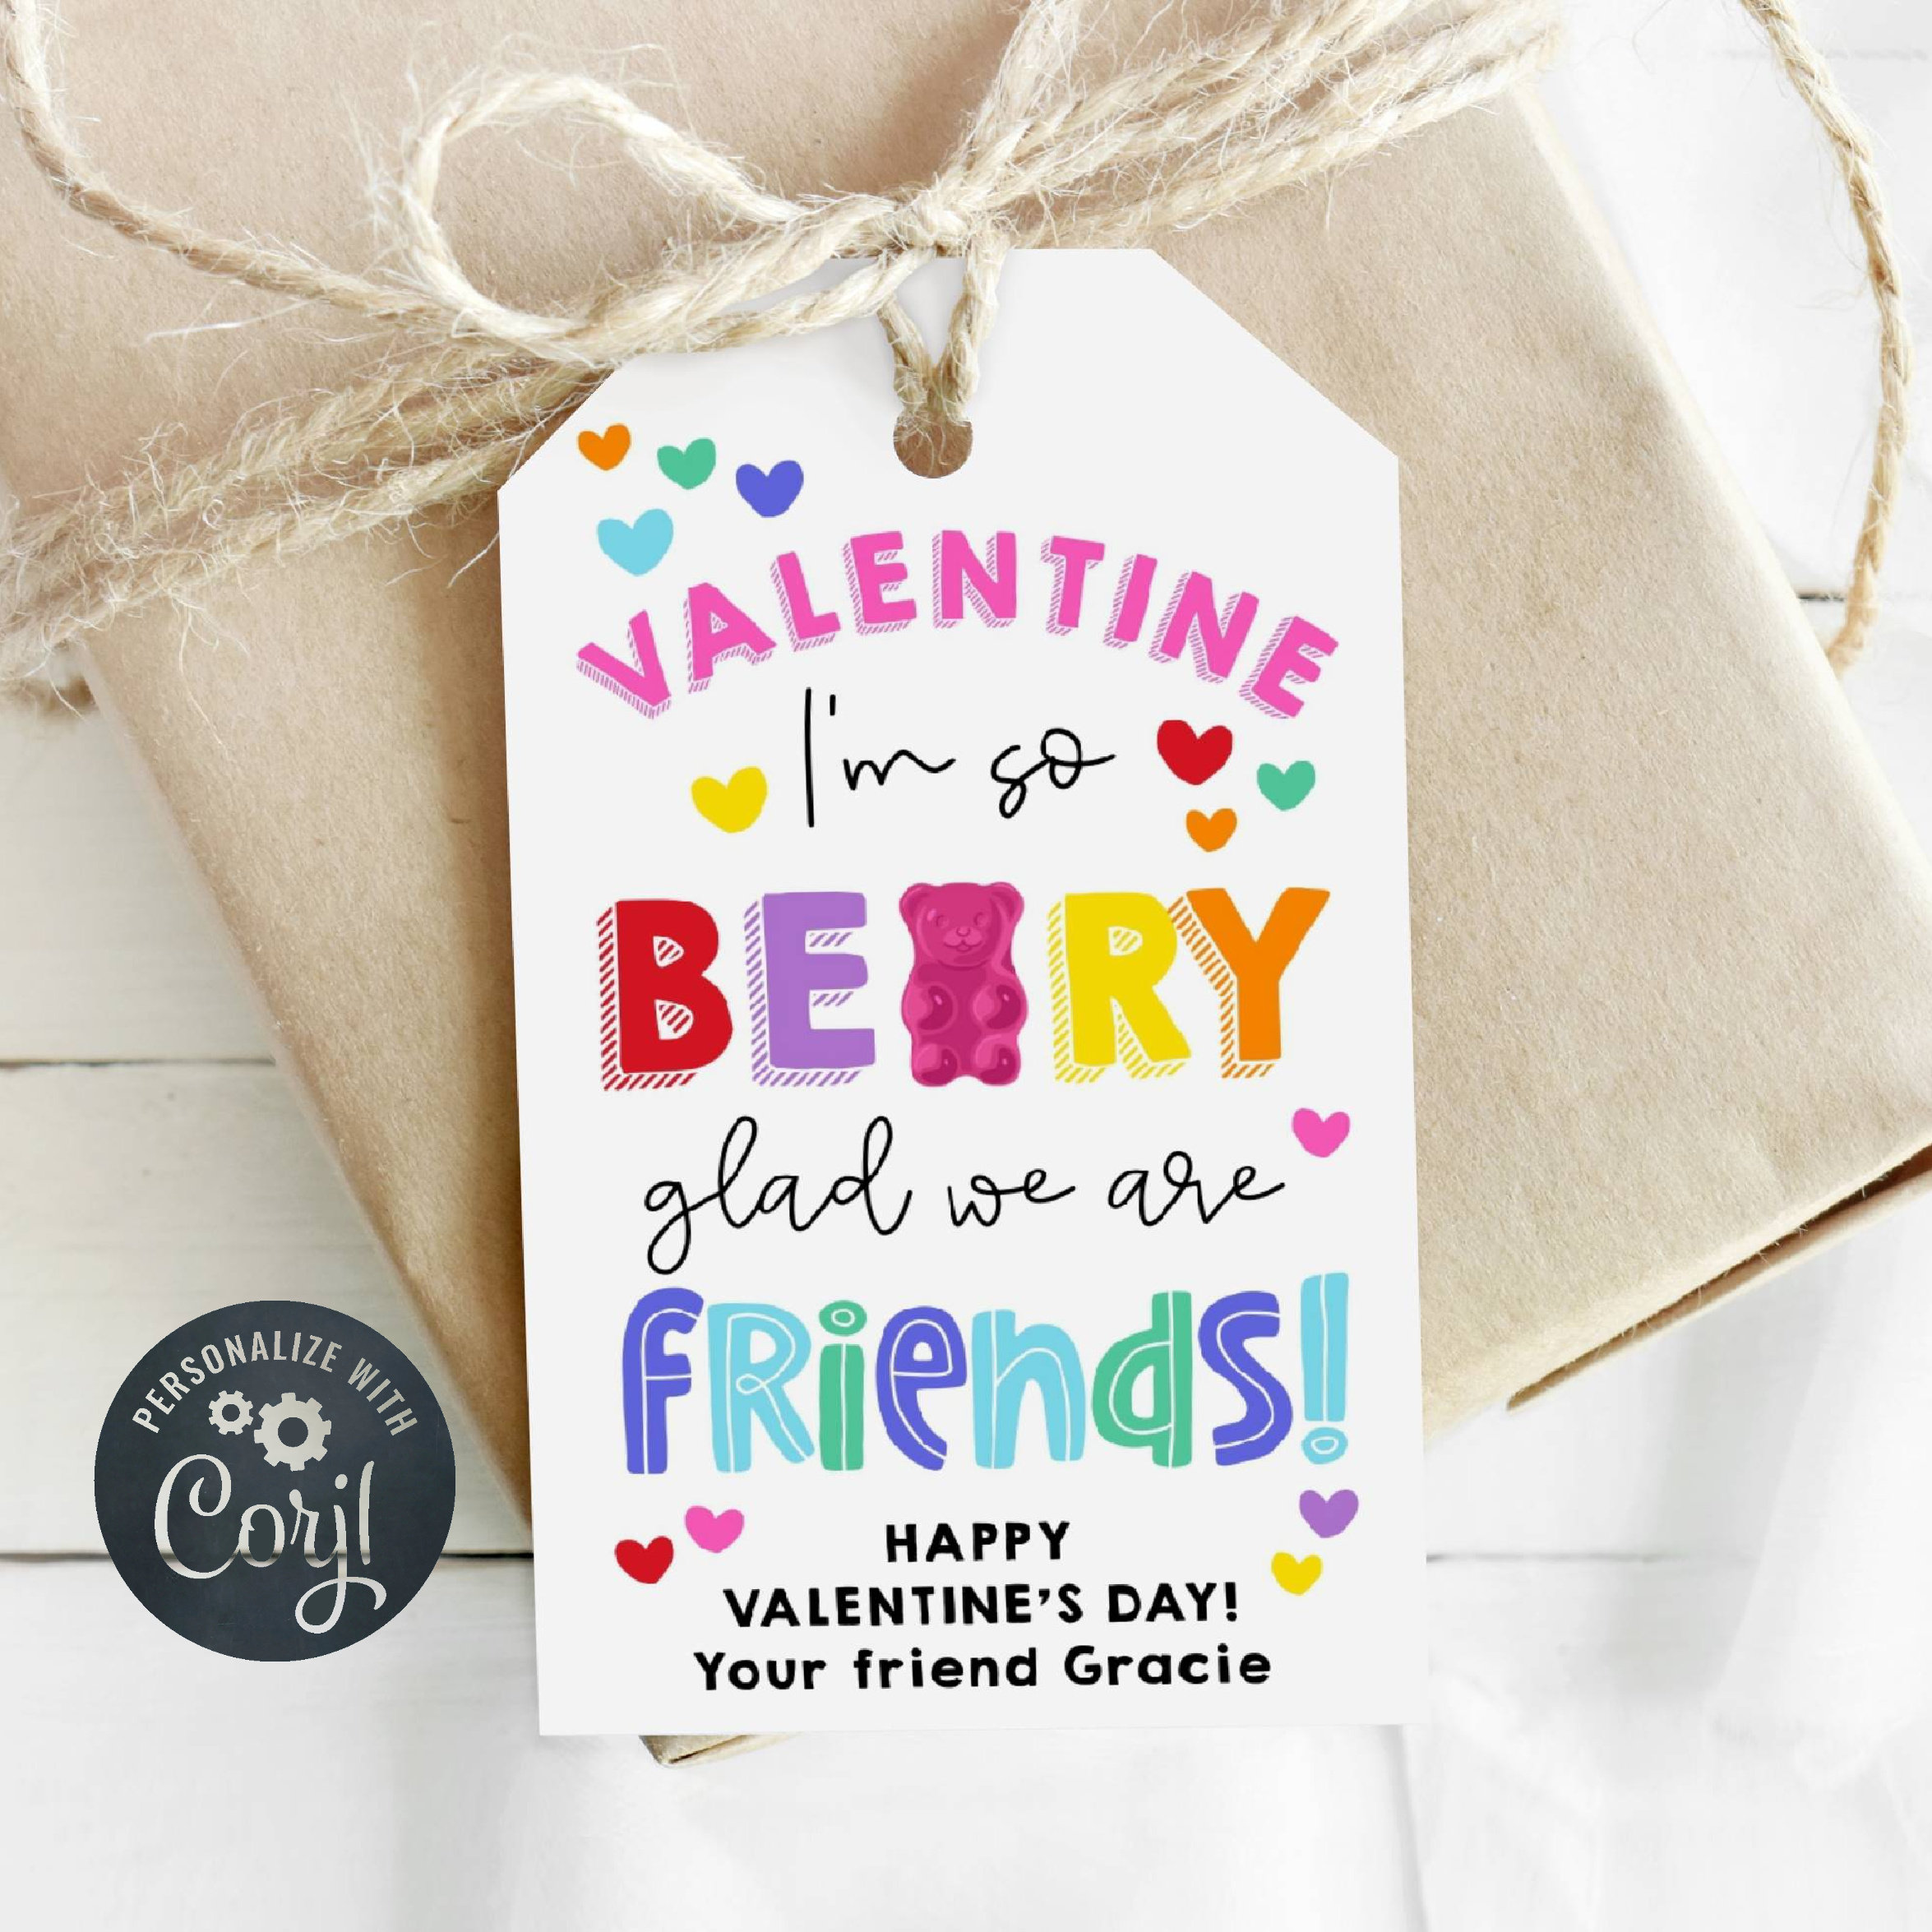 Last-Minute Valentine's Day and Galentine's Day Gifts Under $10